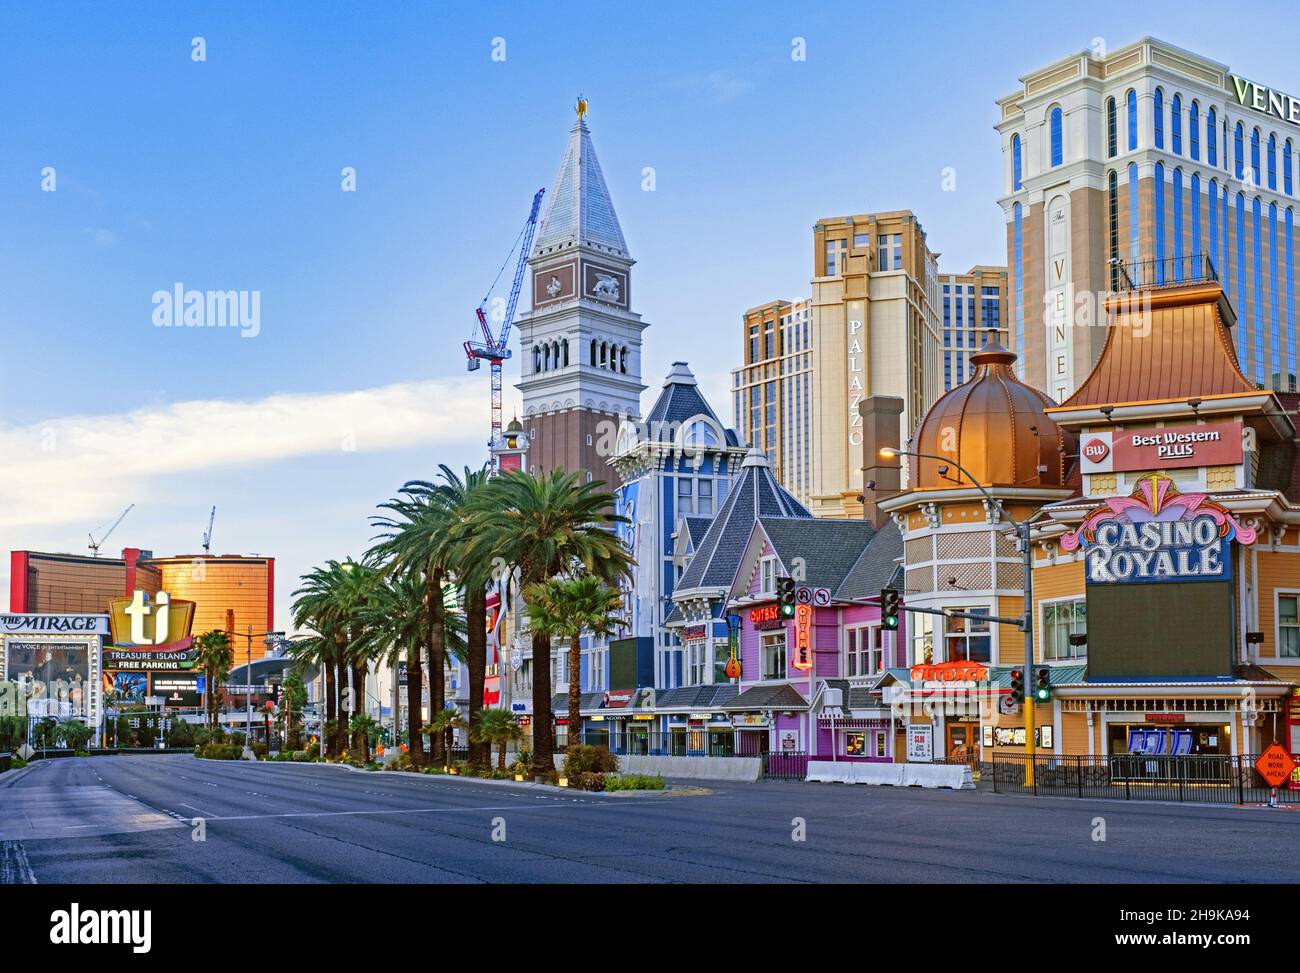 Deserted, empty streets in the city Las Vegas during the COVID-19 pandemic / coronavirus pandemic, Clark County, Nevada, United States, USA Stock Photo